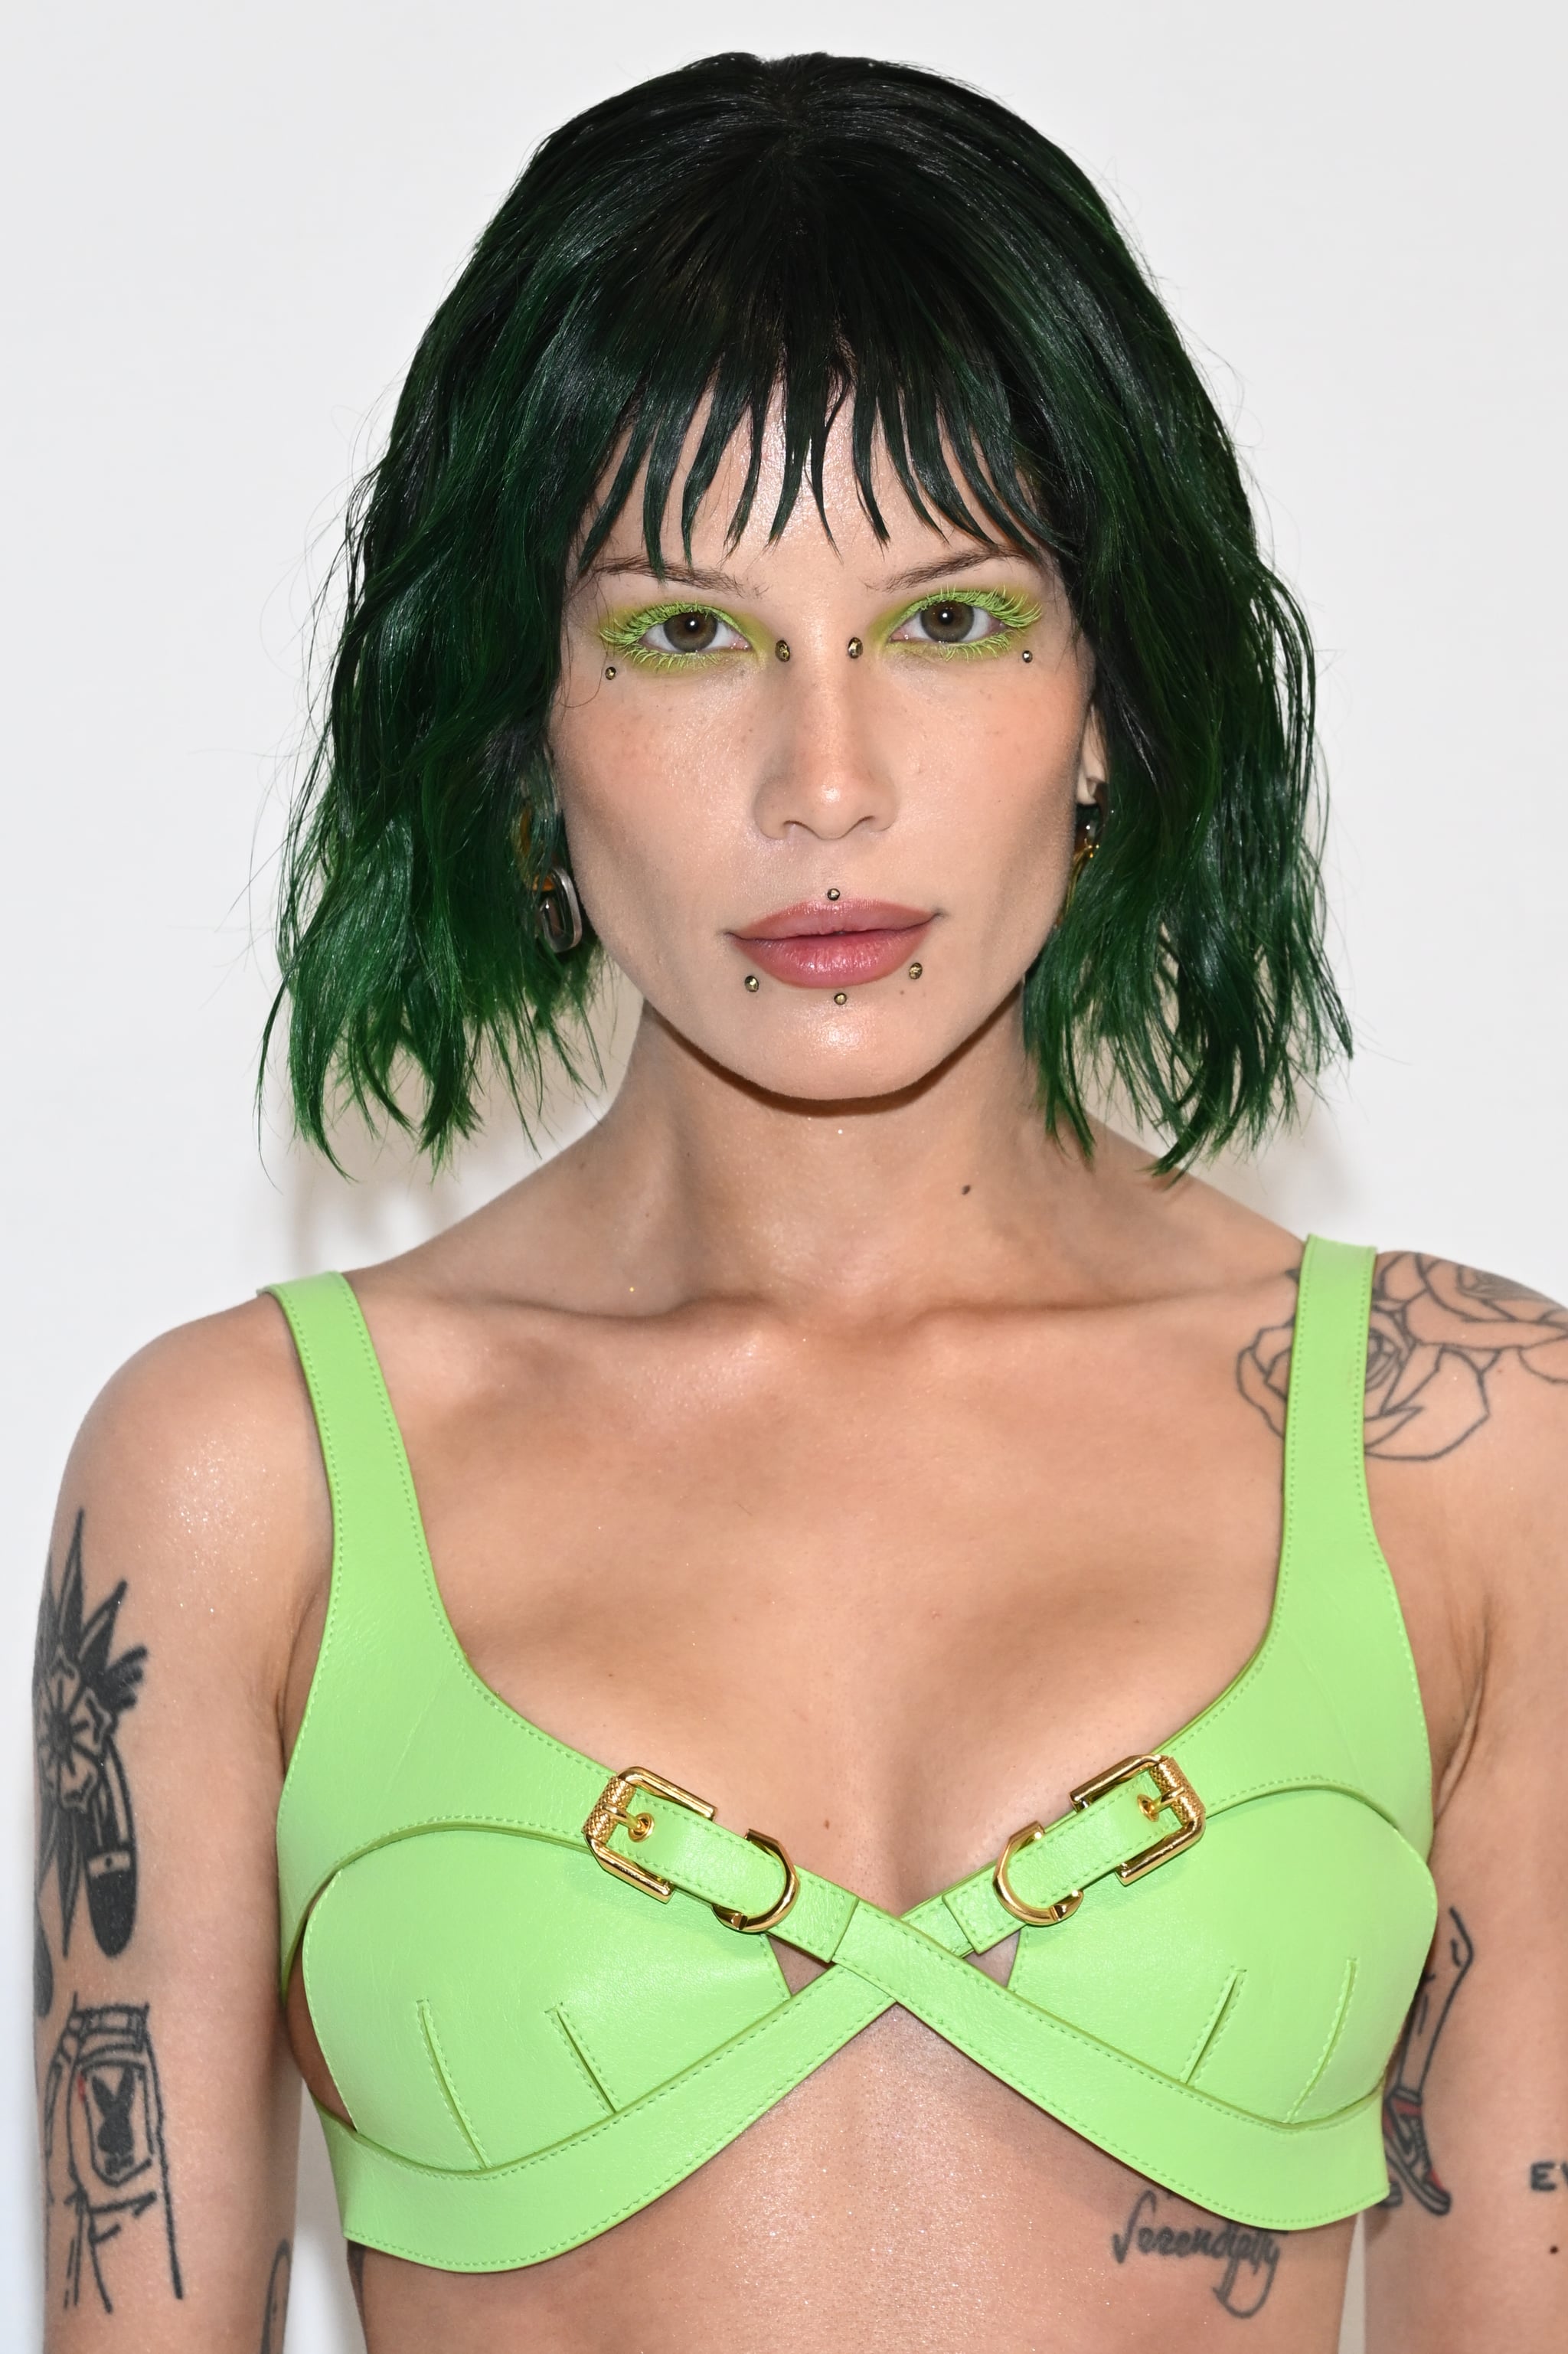 PARIS, FRANCE - MARCH 02: (EDITORIAL USE ONLY - For Non-Editorial use please seek approval from Fashion House) Halsey attends the  Givenchy Womenswear Fall Winter 2023-2024 show as part of Paris Fashion Week  on March 02, 2023 in Paris, France. (Photo by Stephane Cardinale - Corbis/Corbis via Getty Images)